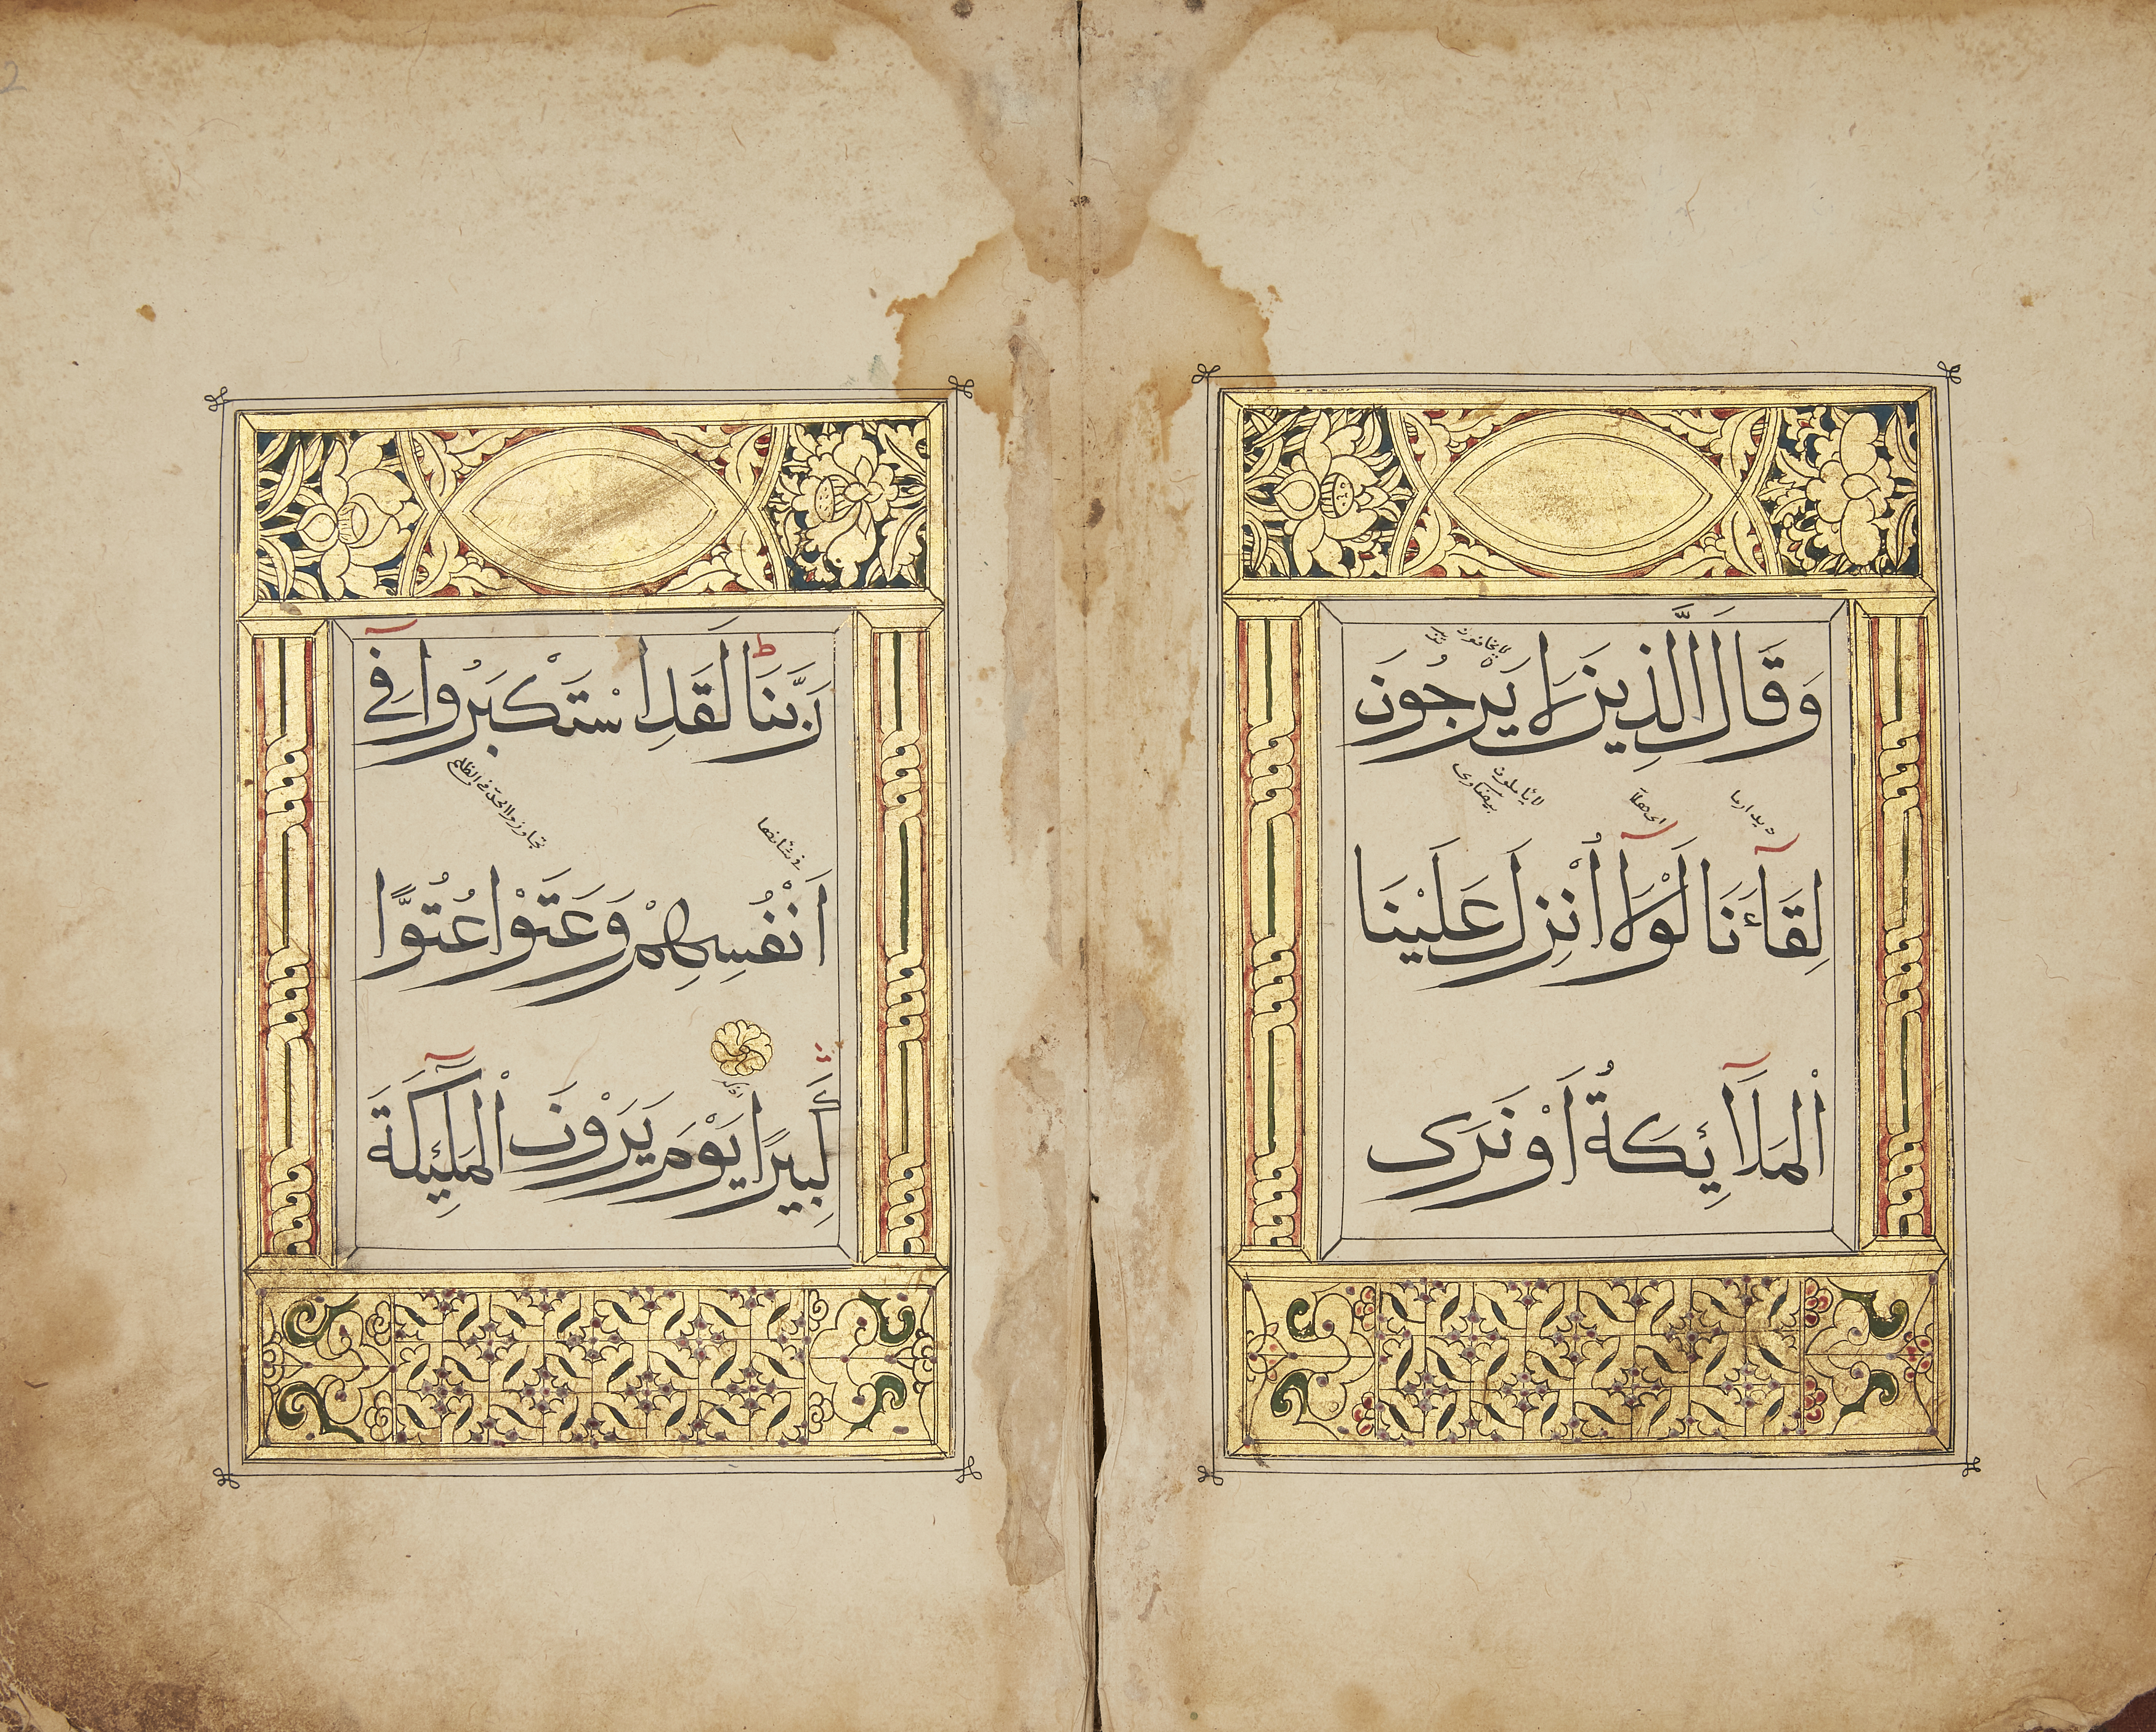 Juz 19 of a 30-part Chinese Qur'an, China, 17th century, Arabic manuscript on paper, 58ff., 2fl...